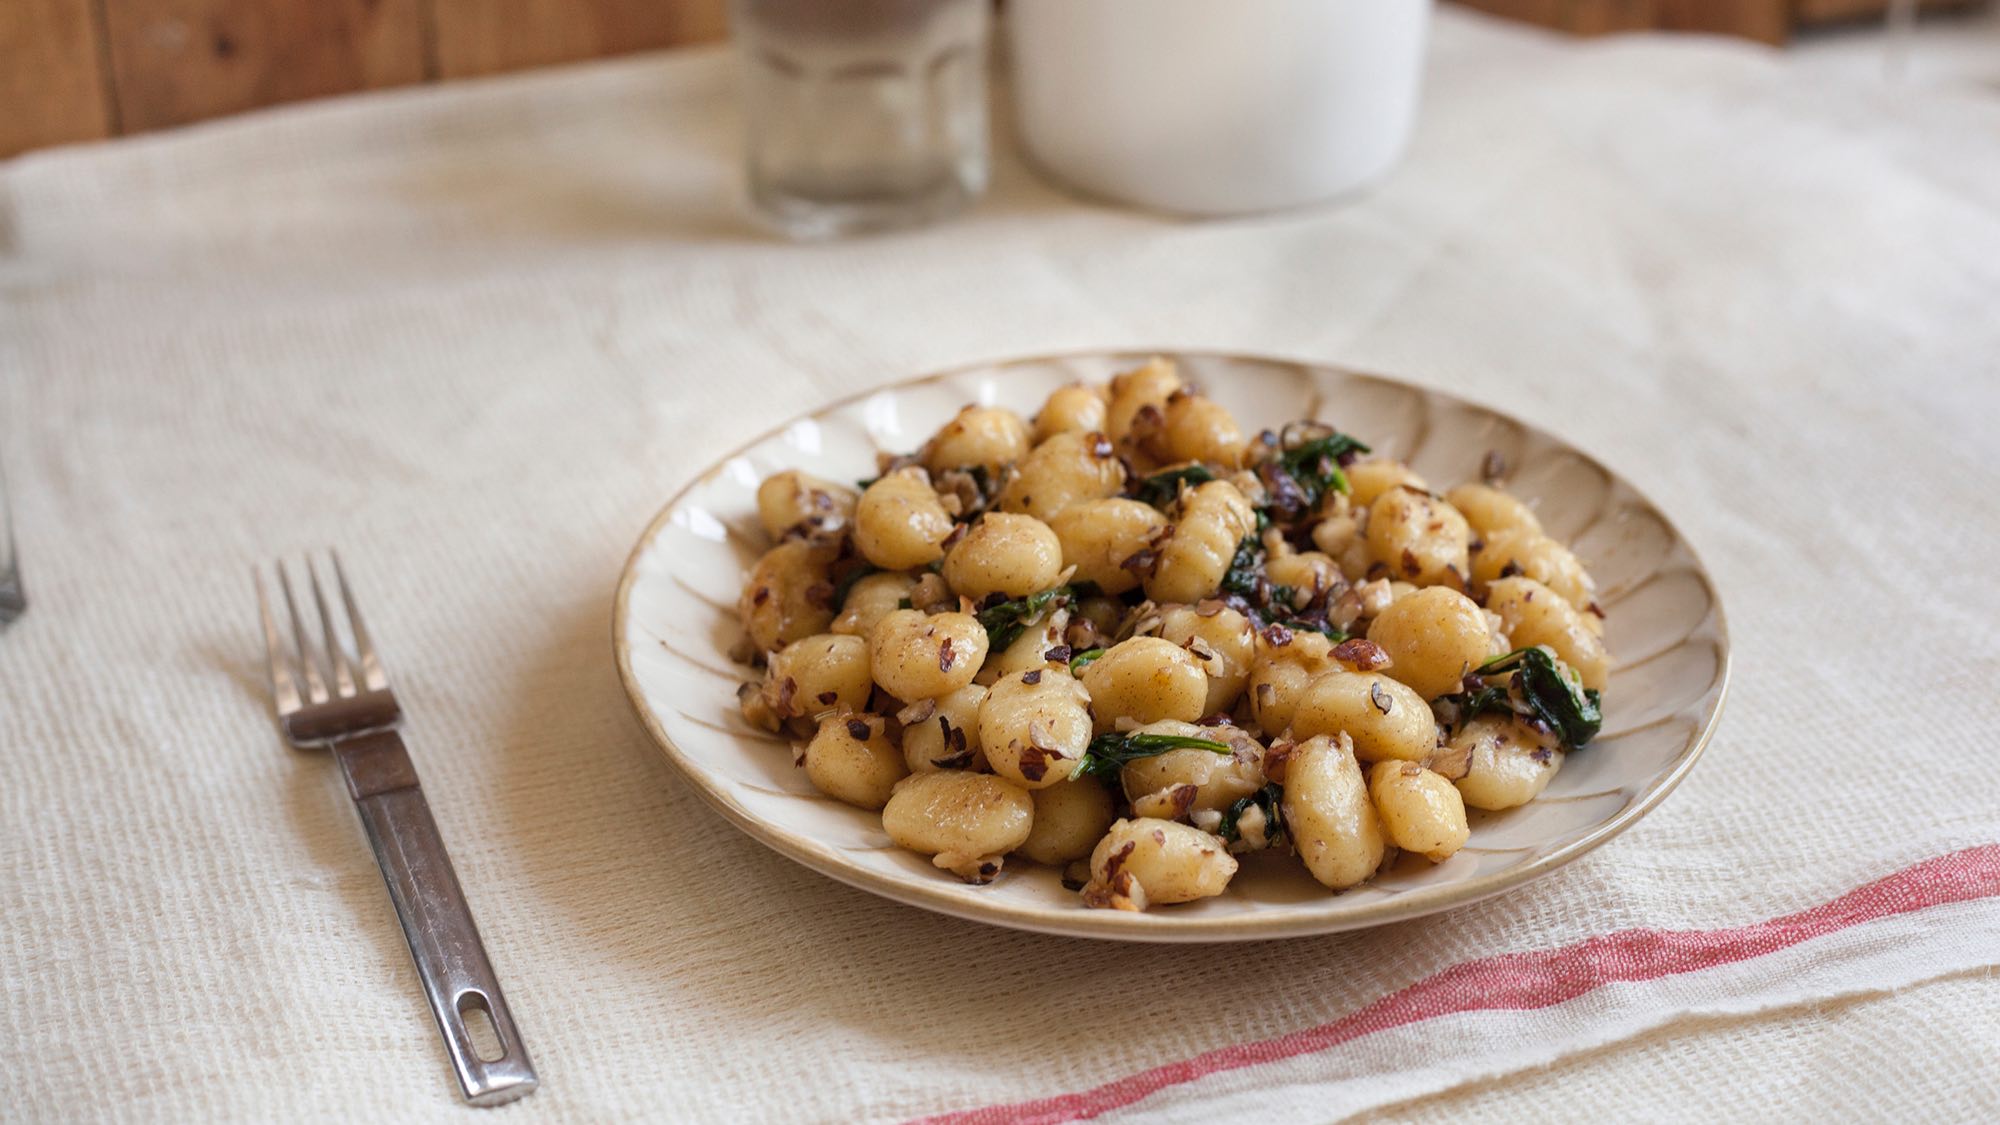 gnocchi-in-vanilla-brown-butter-sauce-with-baby-spinach-and-toasted-hazelnuts-adventures-in-cooking.jpg